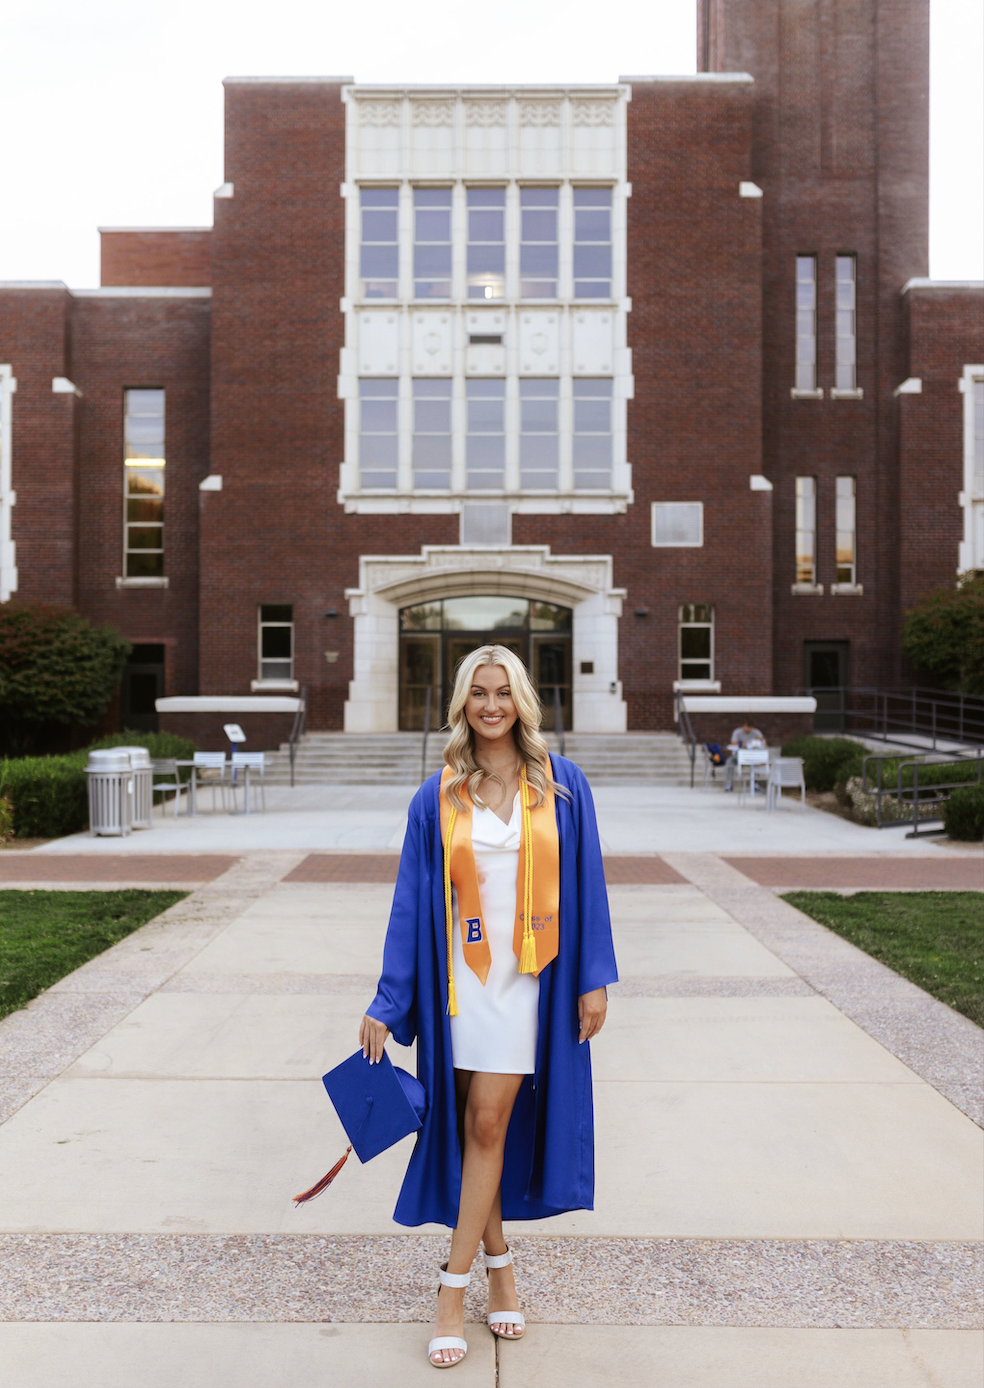 Kaylie Jones with cap and gown posing on campus